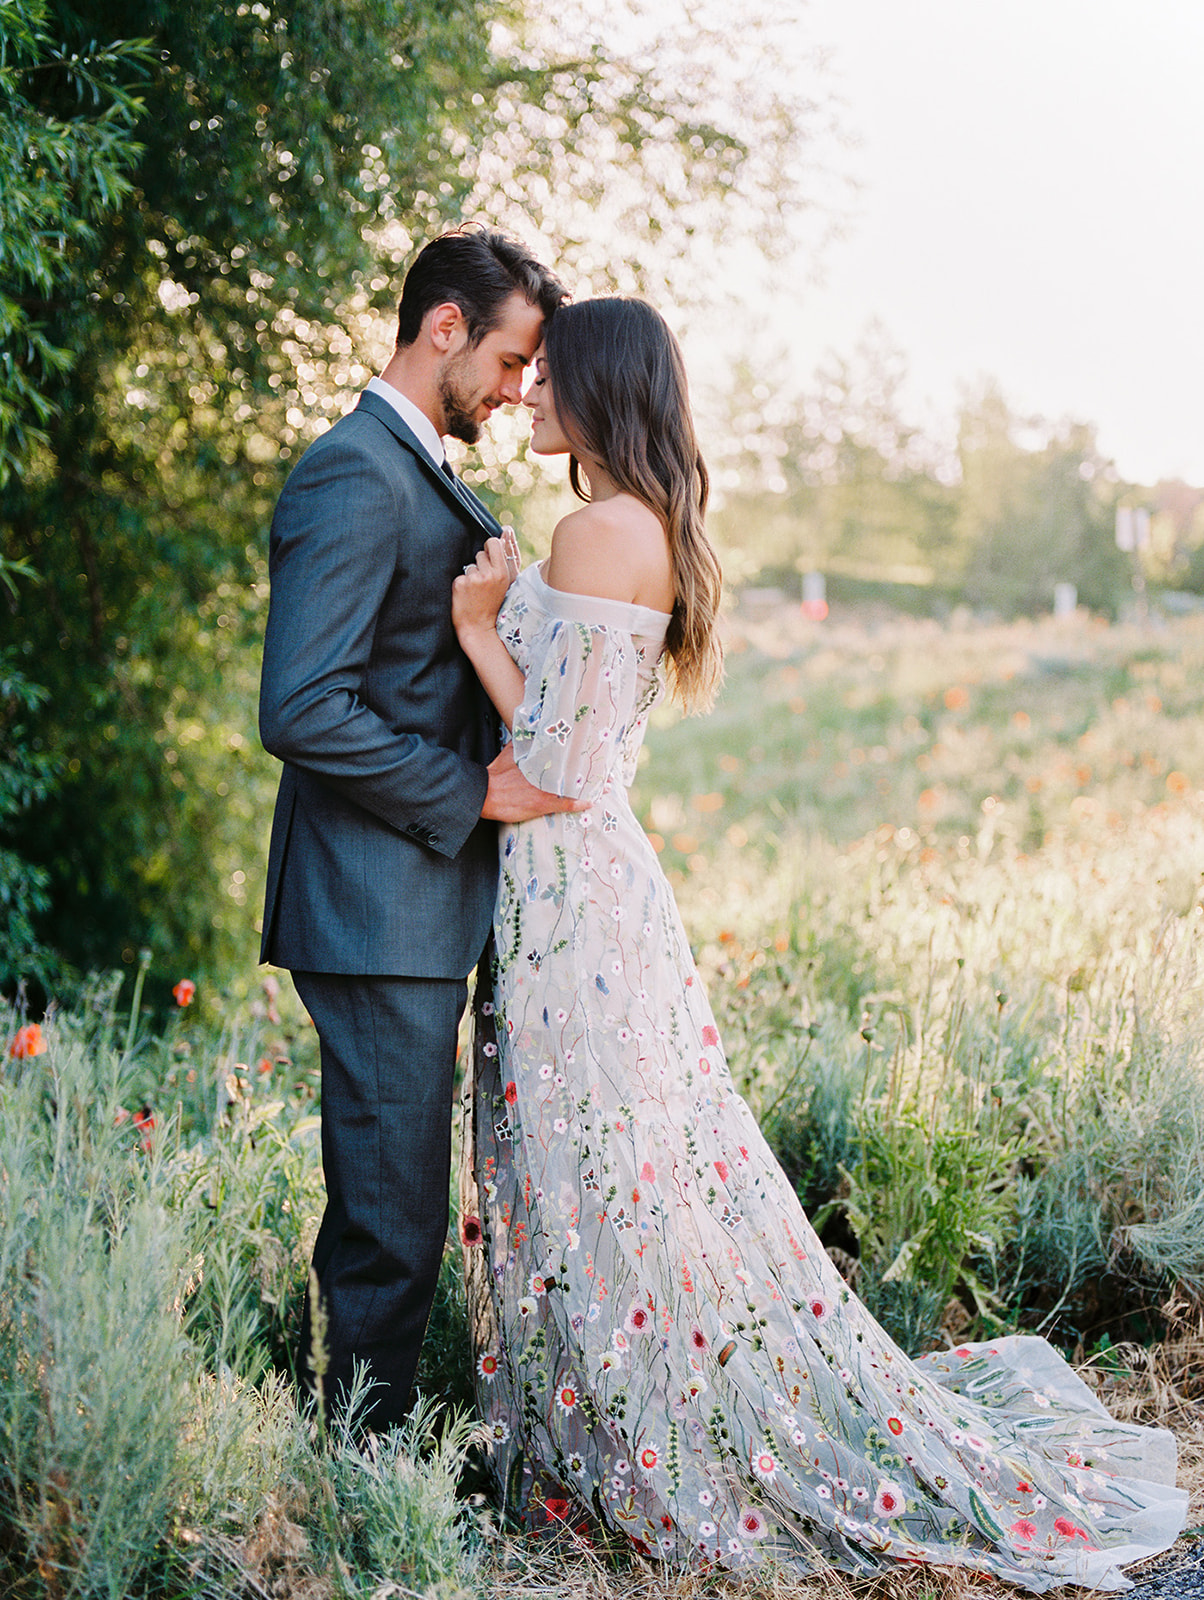 groom with his bride wearing an embroidered floral wedding dress 